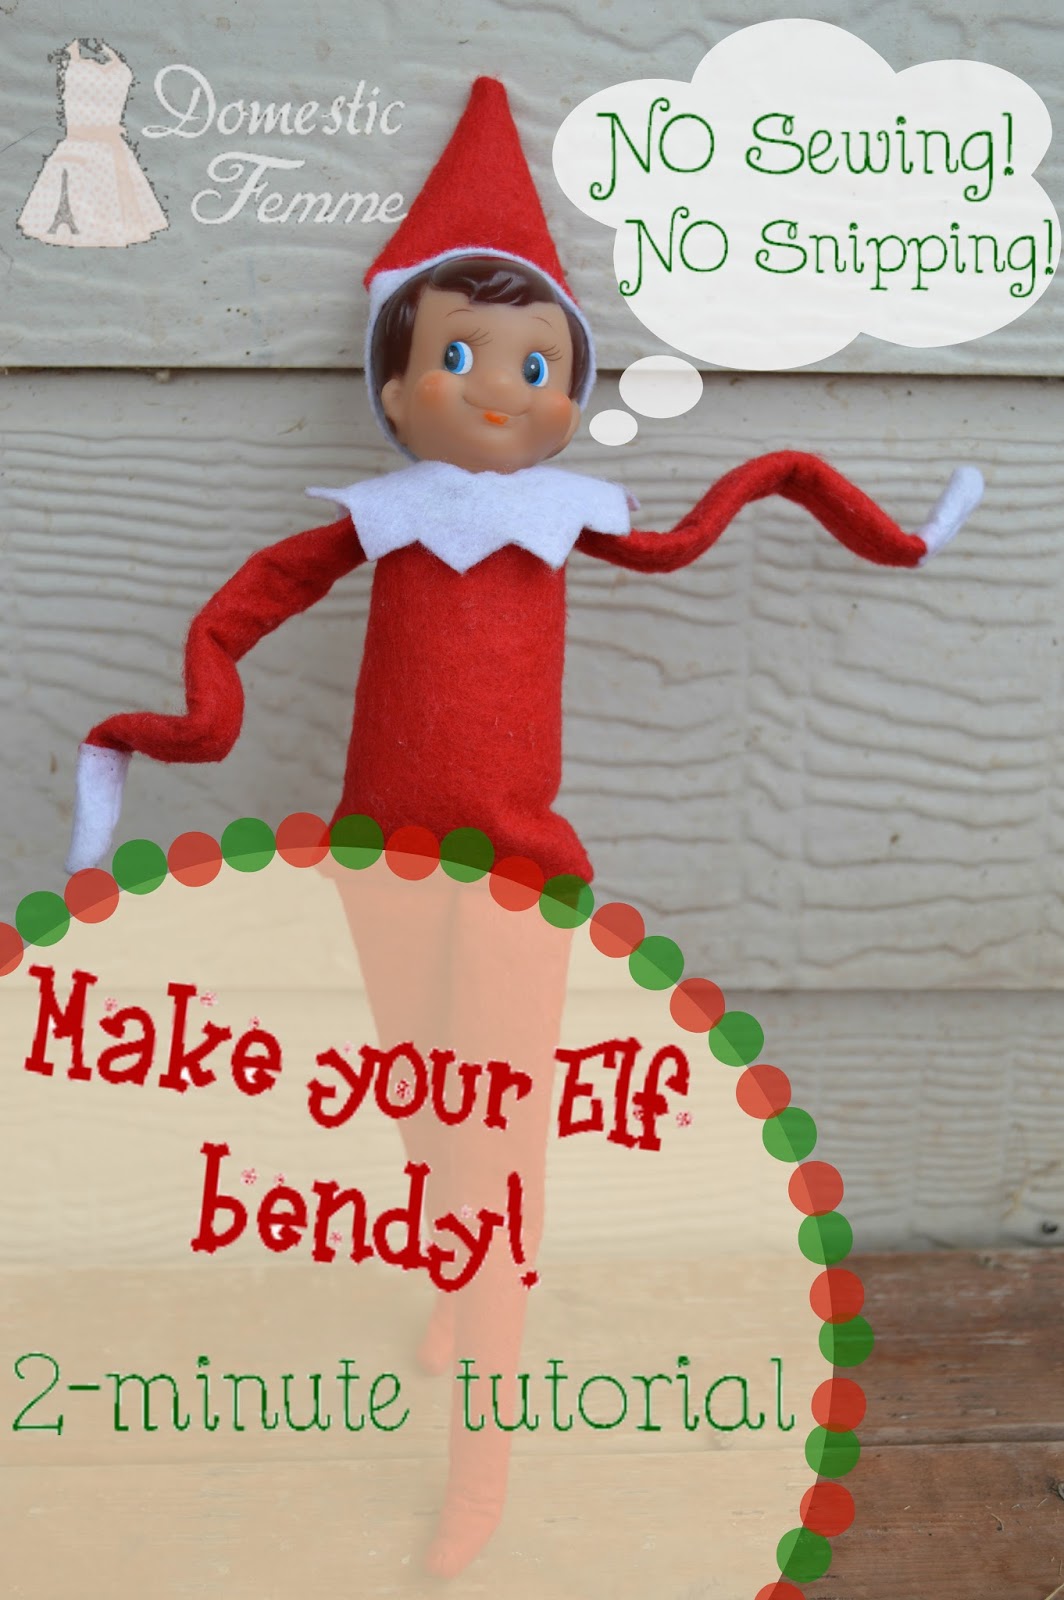 Domestic Femme: Make Your Elf on the Shelf Bendy! A Quick and Easy Tutorial